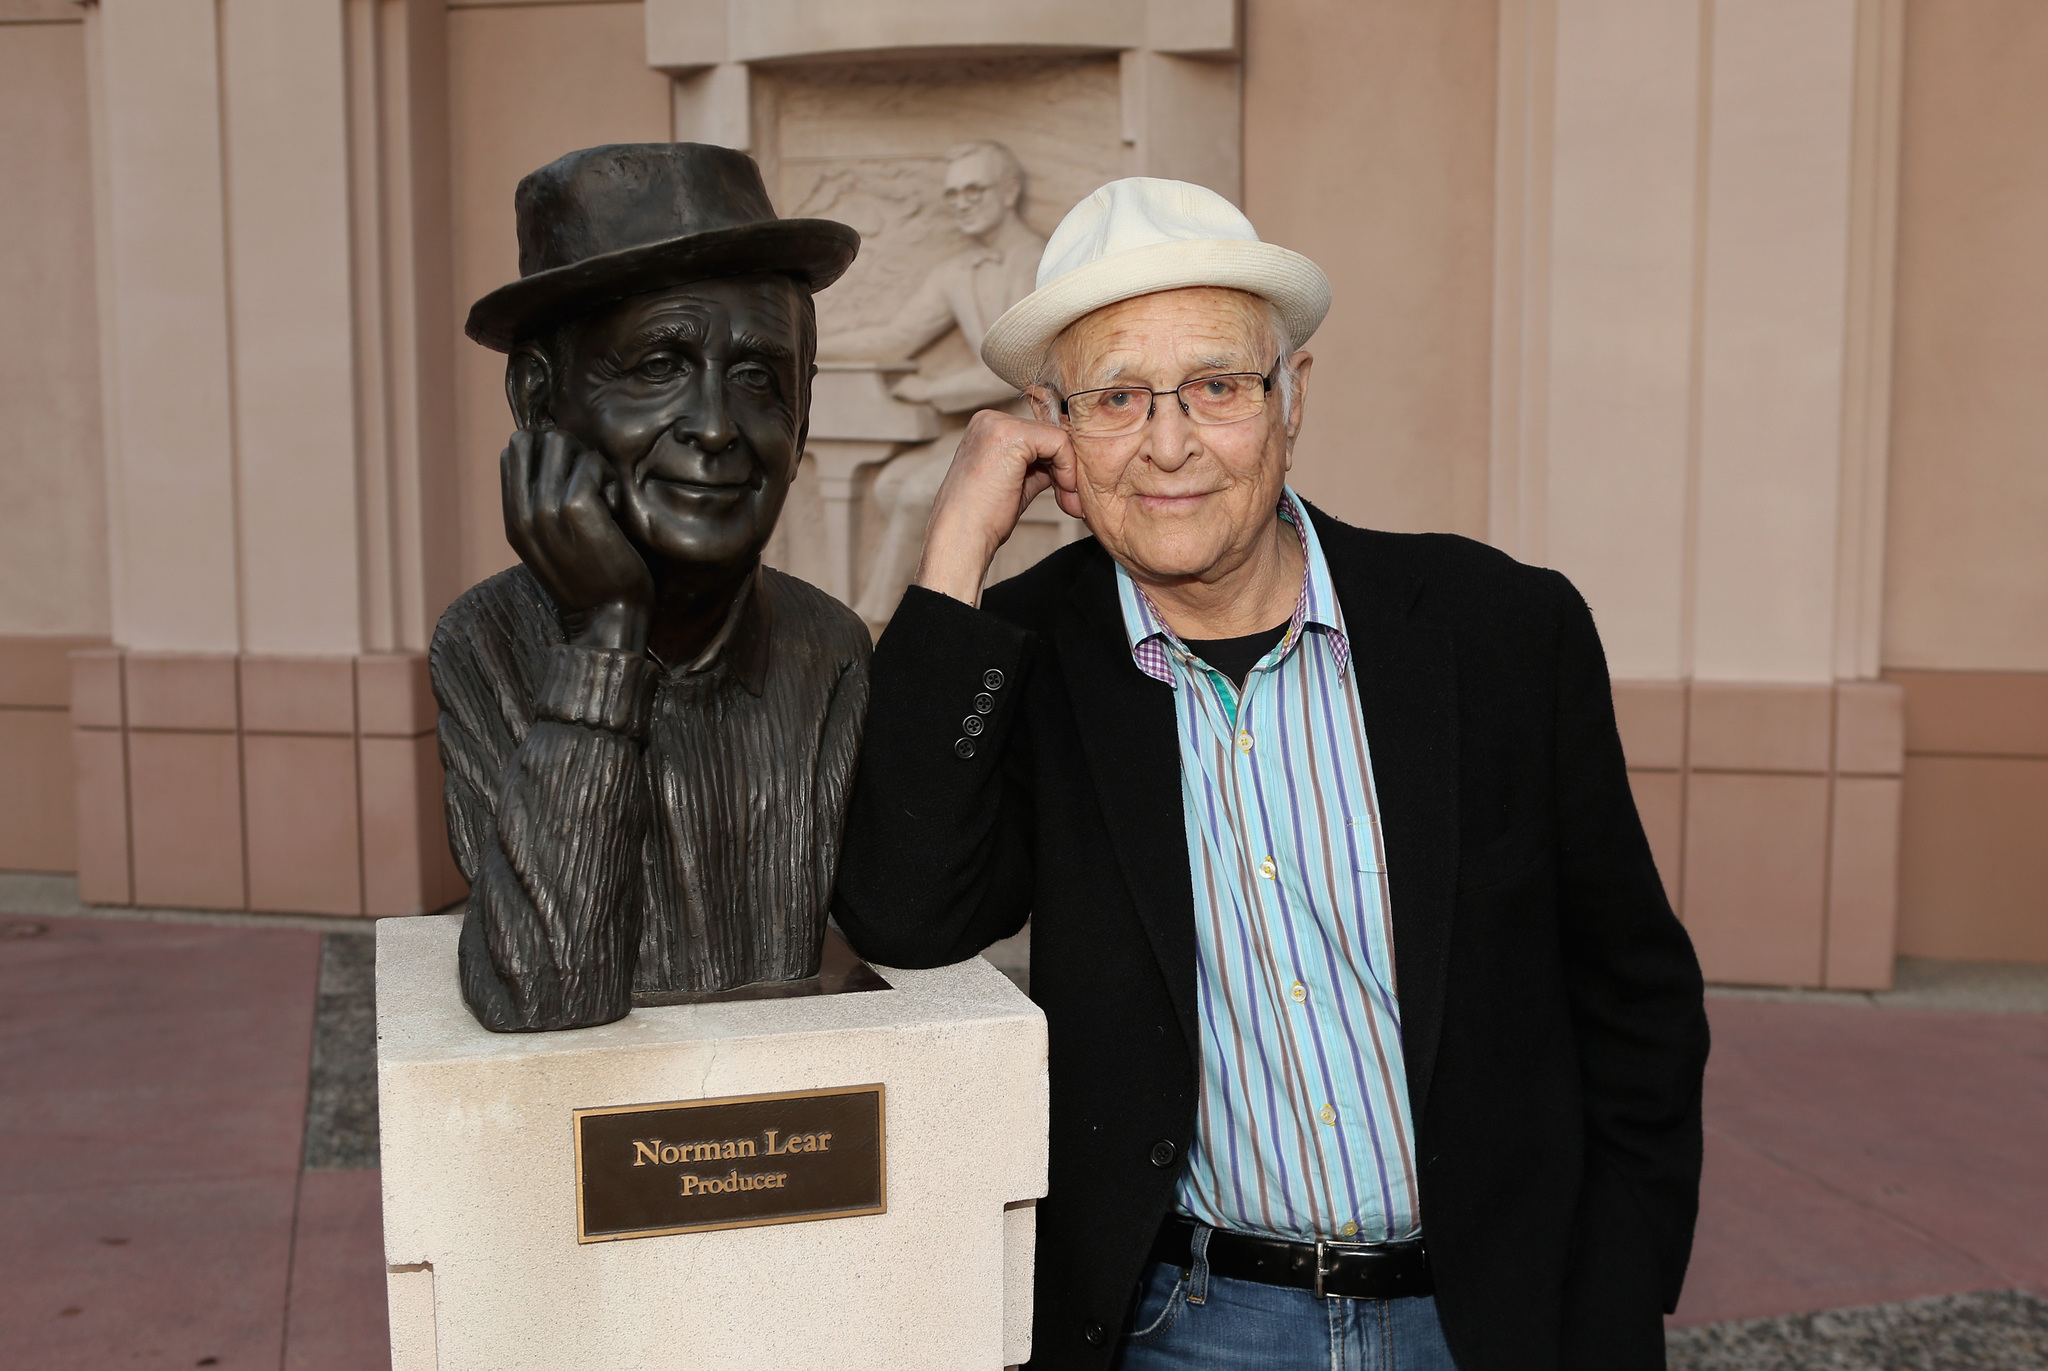 Producer Norman Lear attends The Tanning of America special screening at the Leonard Goldenson Theatre on June 3, 2014 in North Hollywood, California.